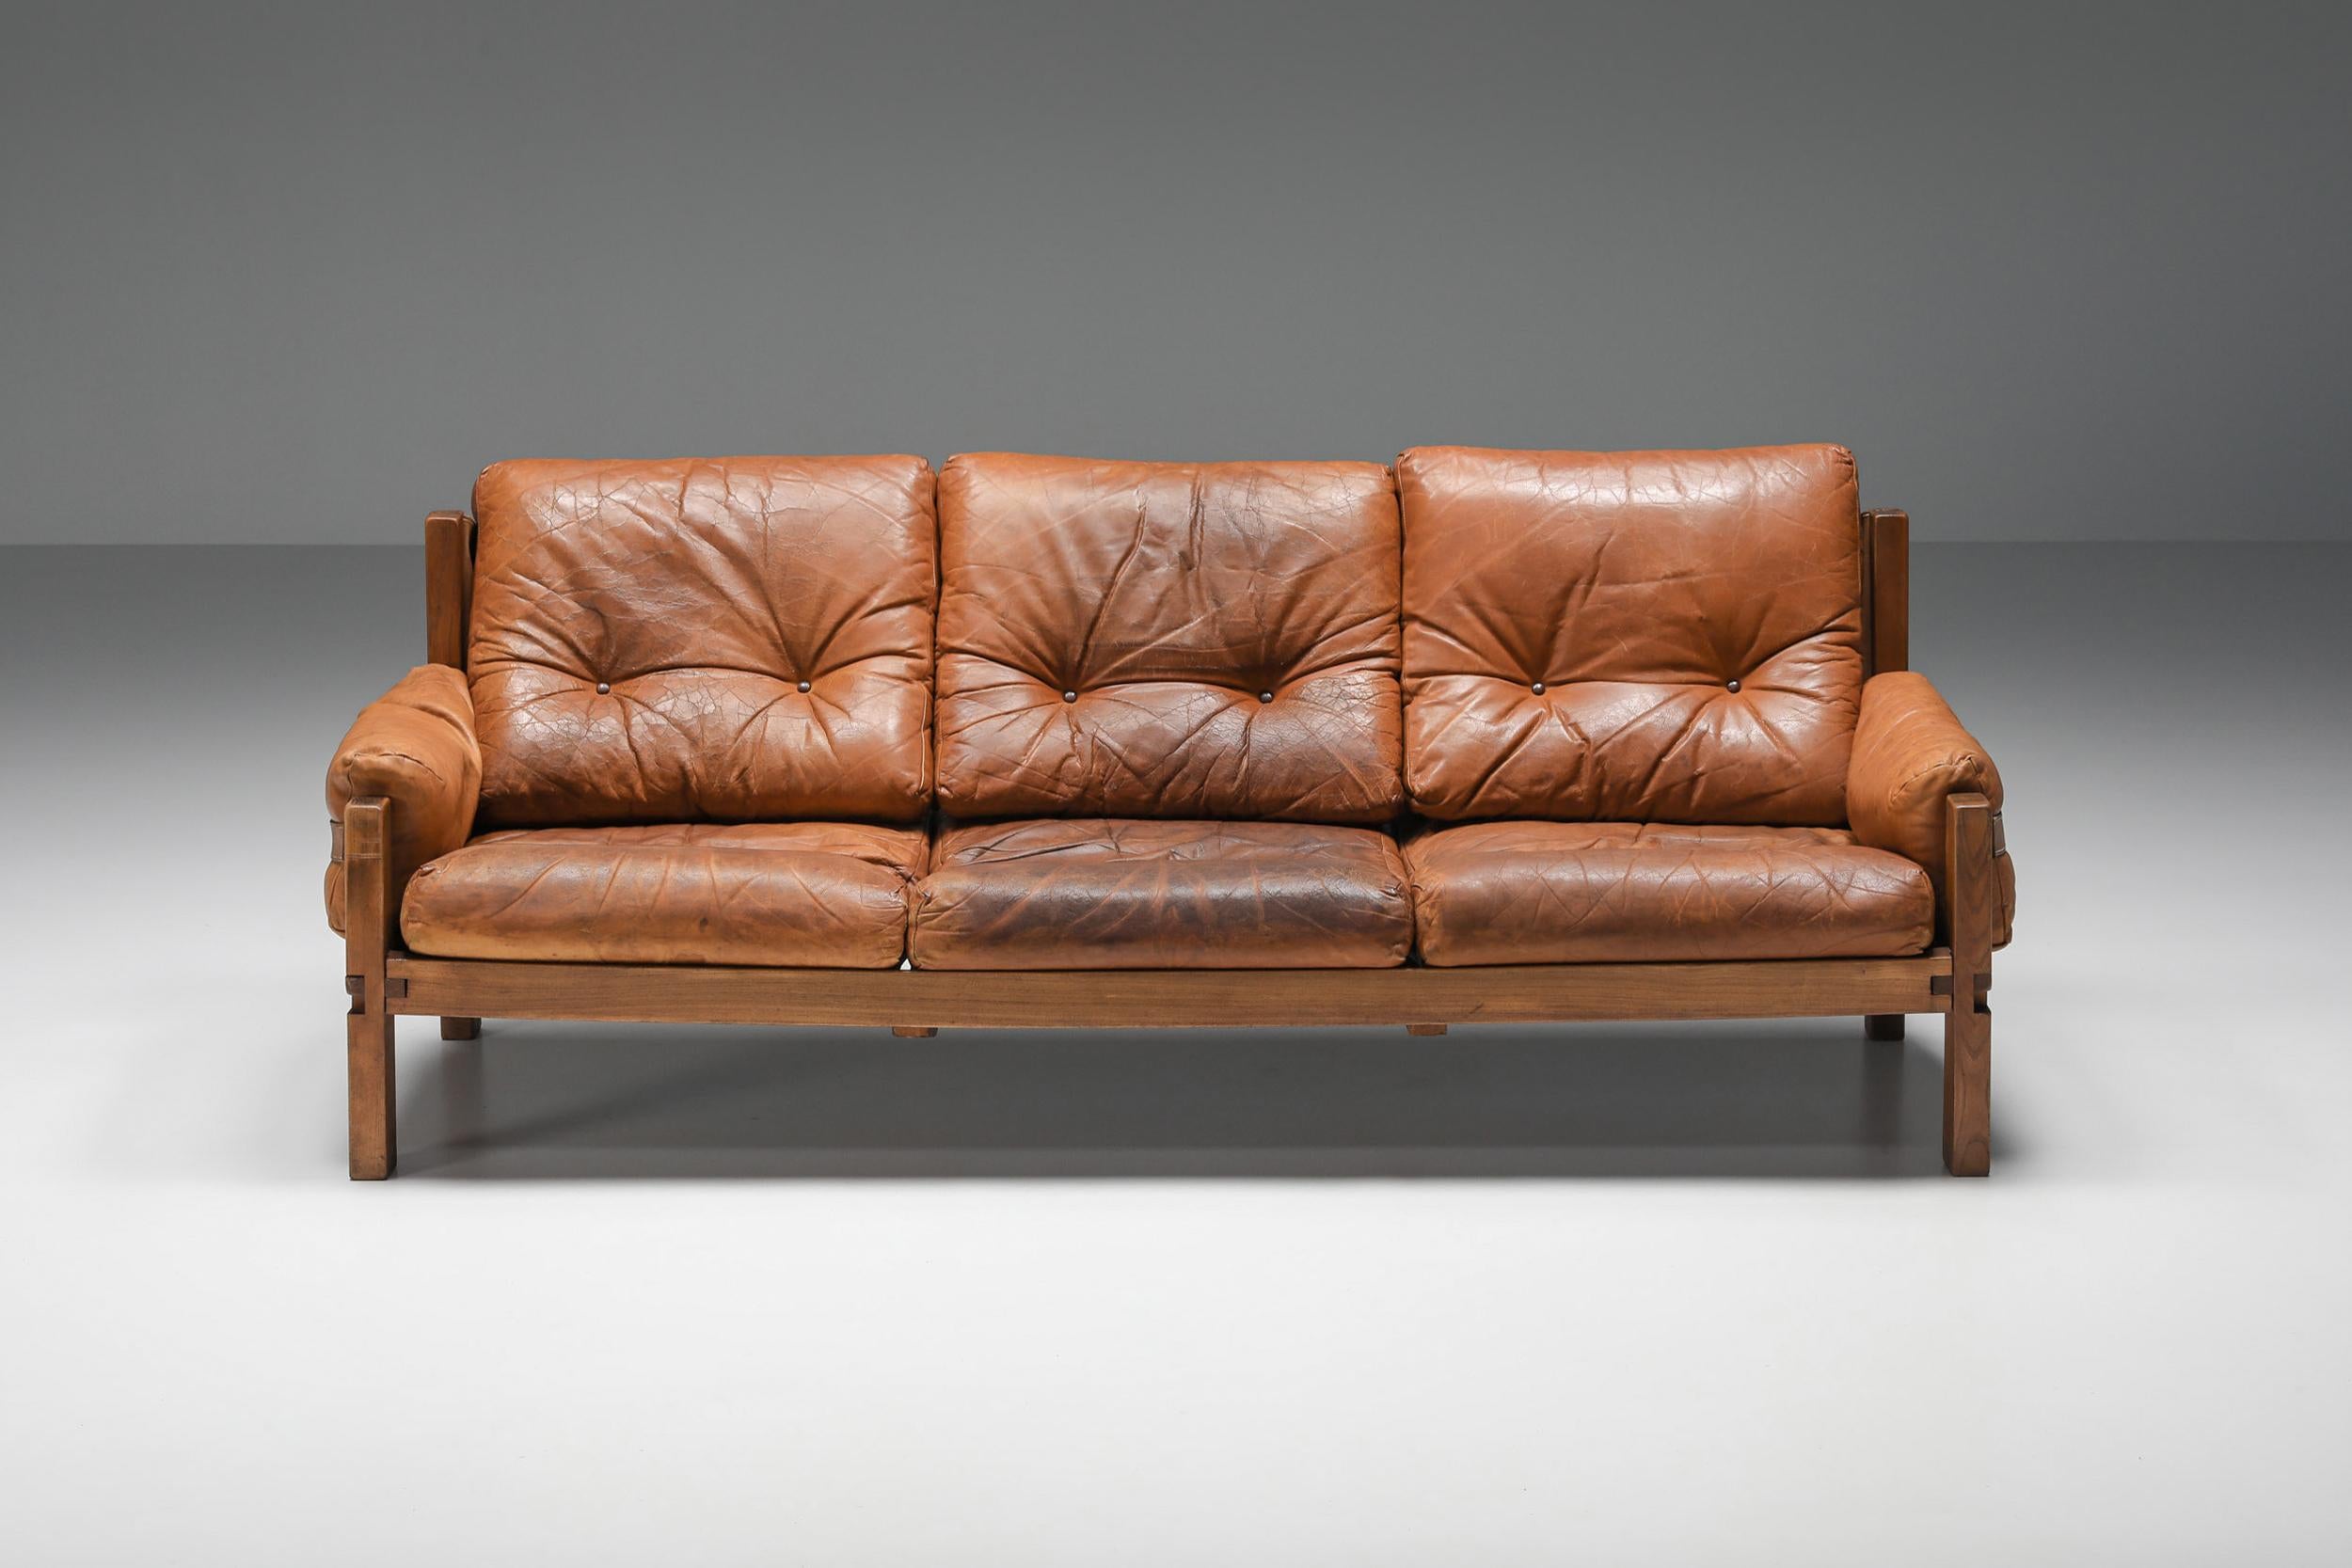 Pierre Chapo; S32 Elm & Leather; Sofa; 1970's; French Design; Craftsman; Lounge sofa; 3-seater; Charlotte Perriand; 

Lounge sofa model S32 was designed by Pierre Chapo and manufactured in his own workshop, France 1967. This three-seat sofa